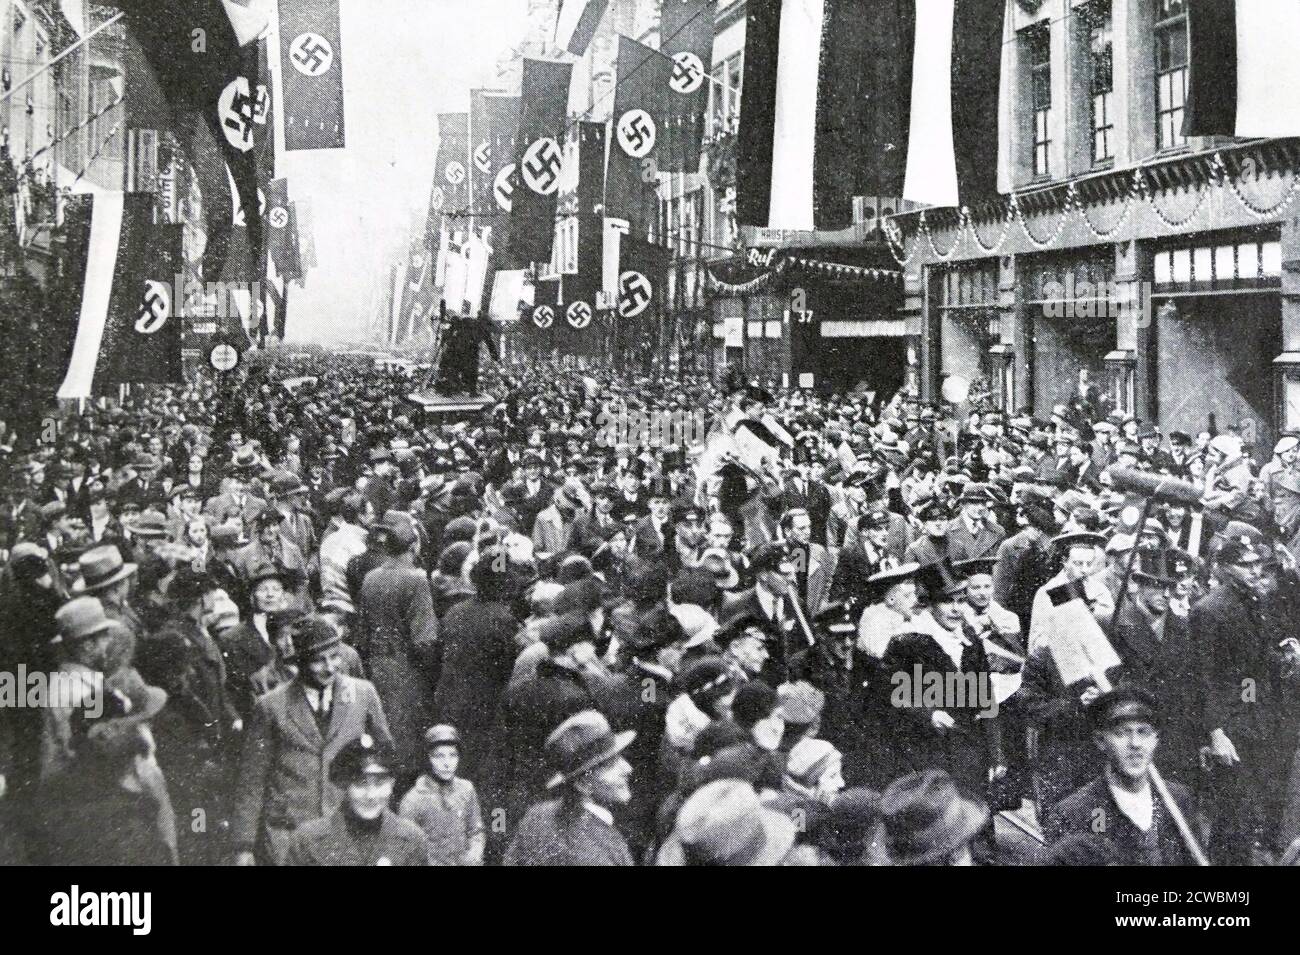 Black and white photo of the aftermath of the Saar Plebiscite, 13 January 1935; people in the streets after the results are announced. Stock Photo